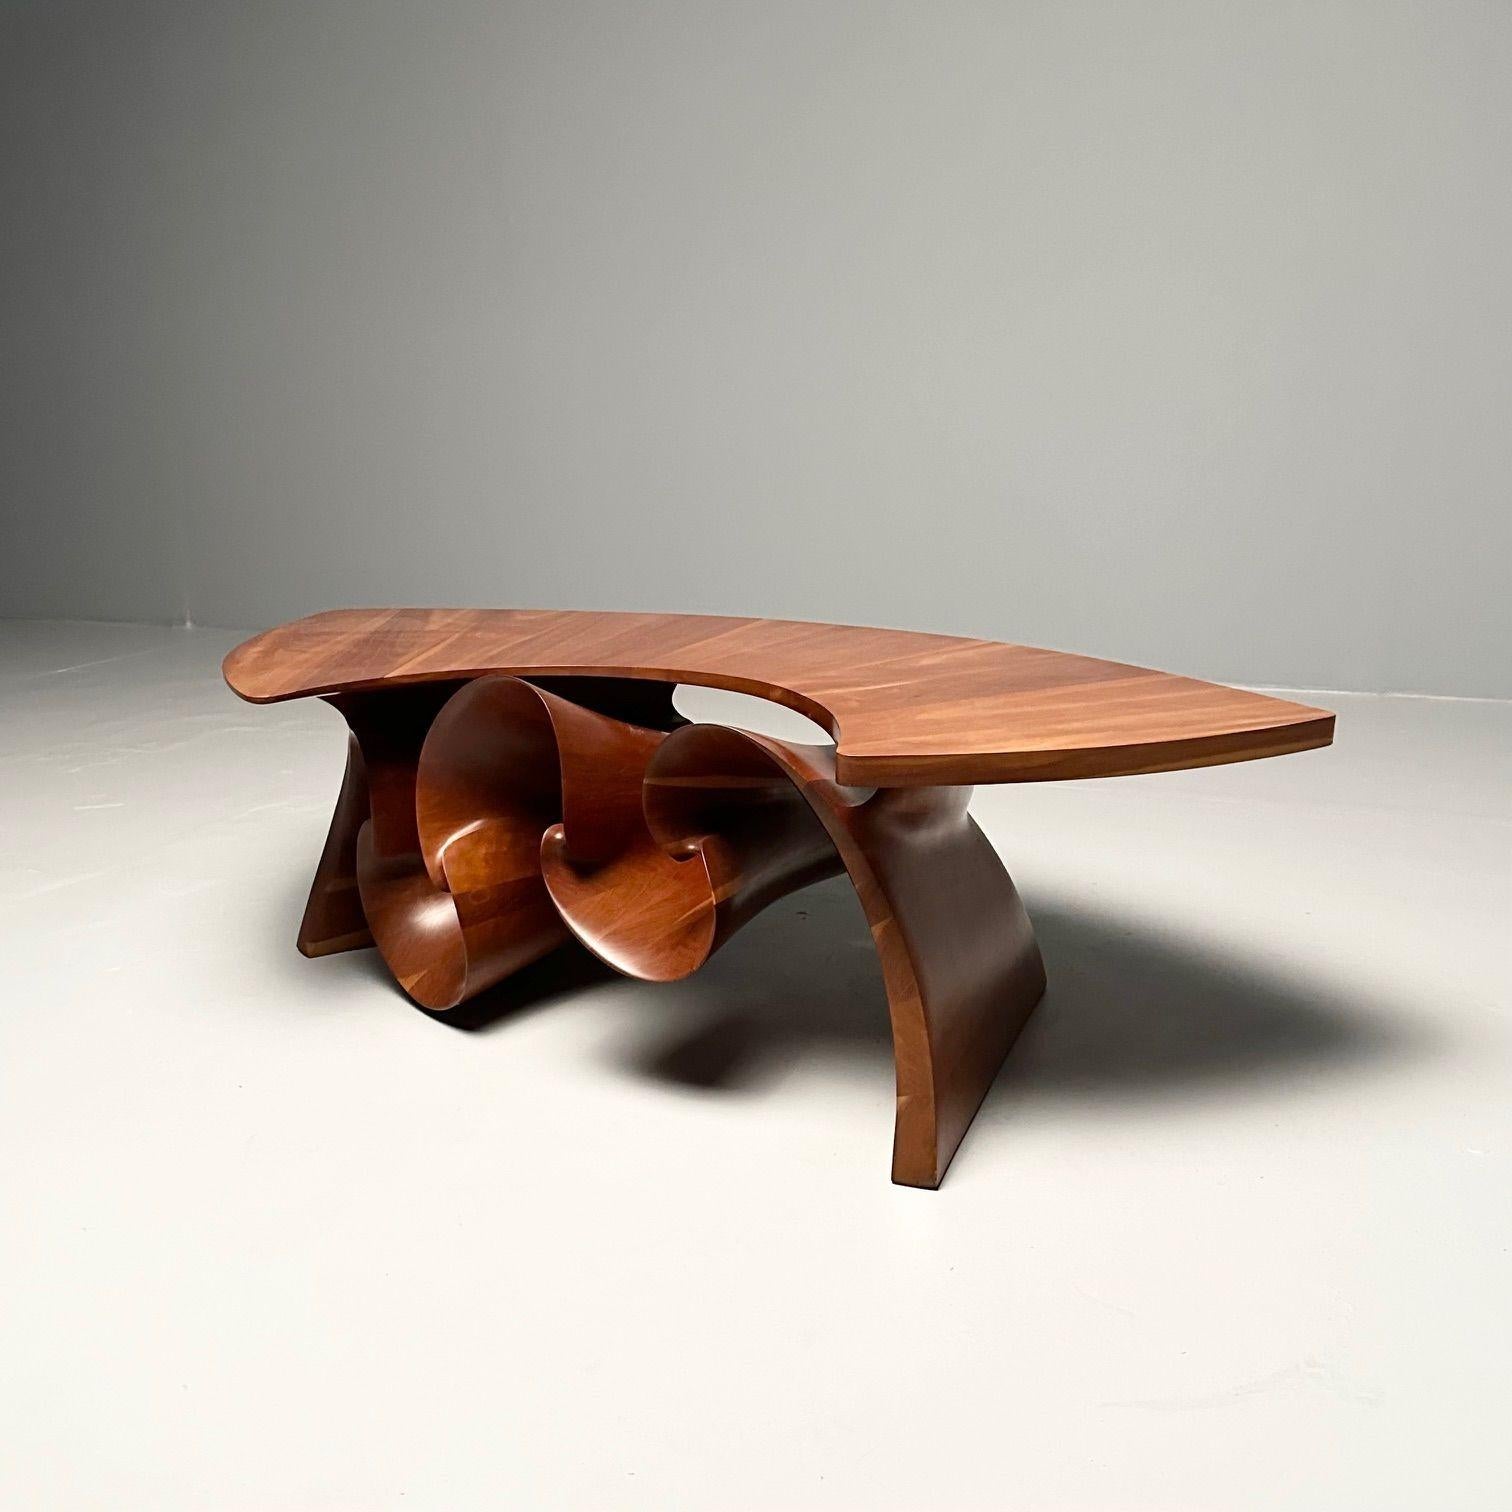 Wood Peter Michael Adams, Mid-Century, Sculptural Coffee Table, Walnut, USA, 1970s For Sale